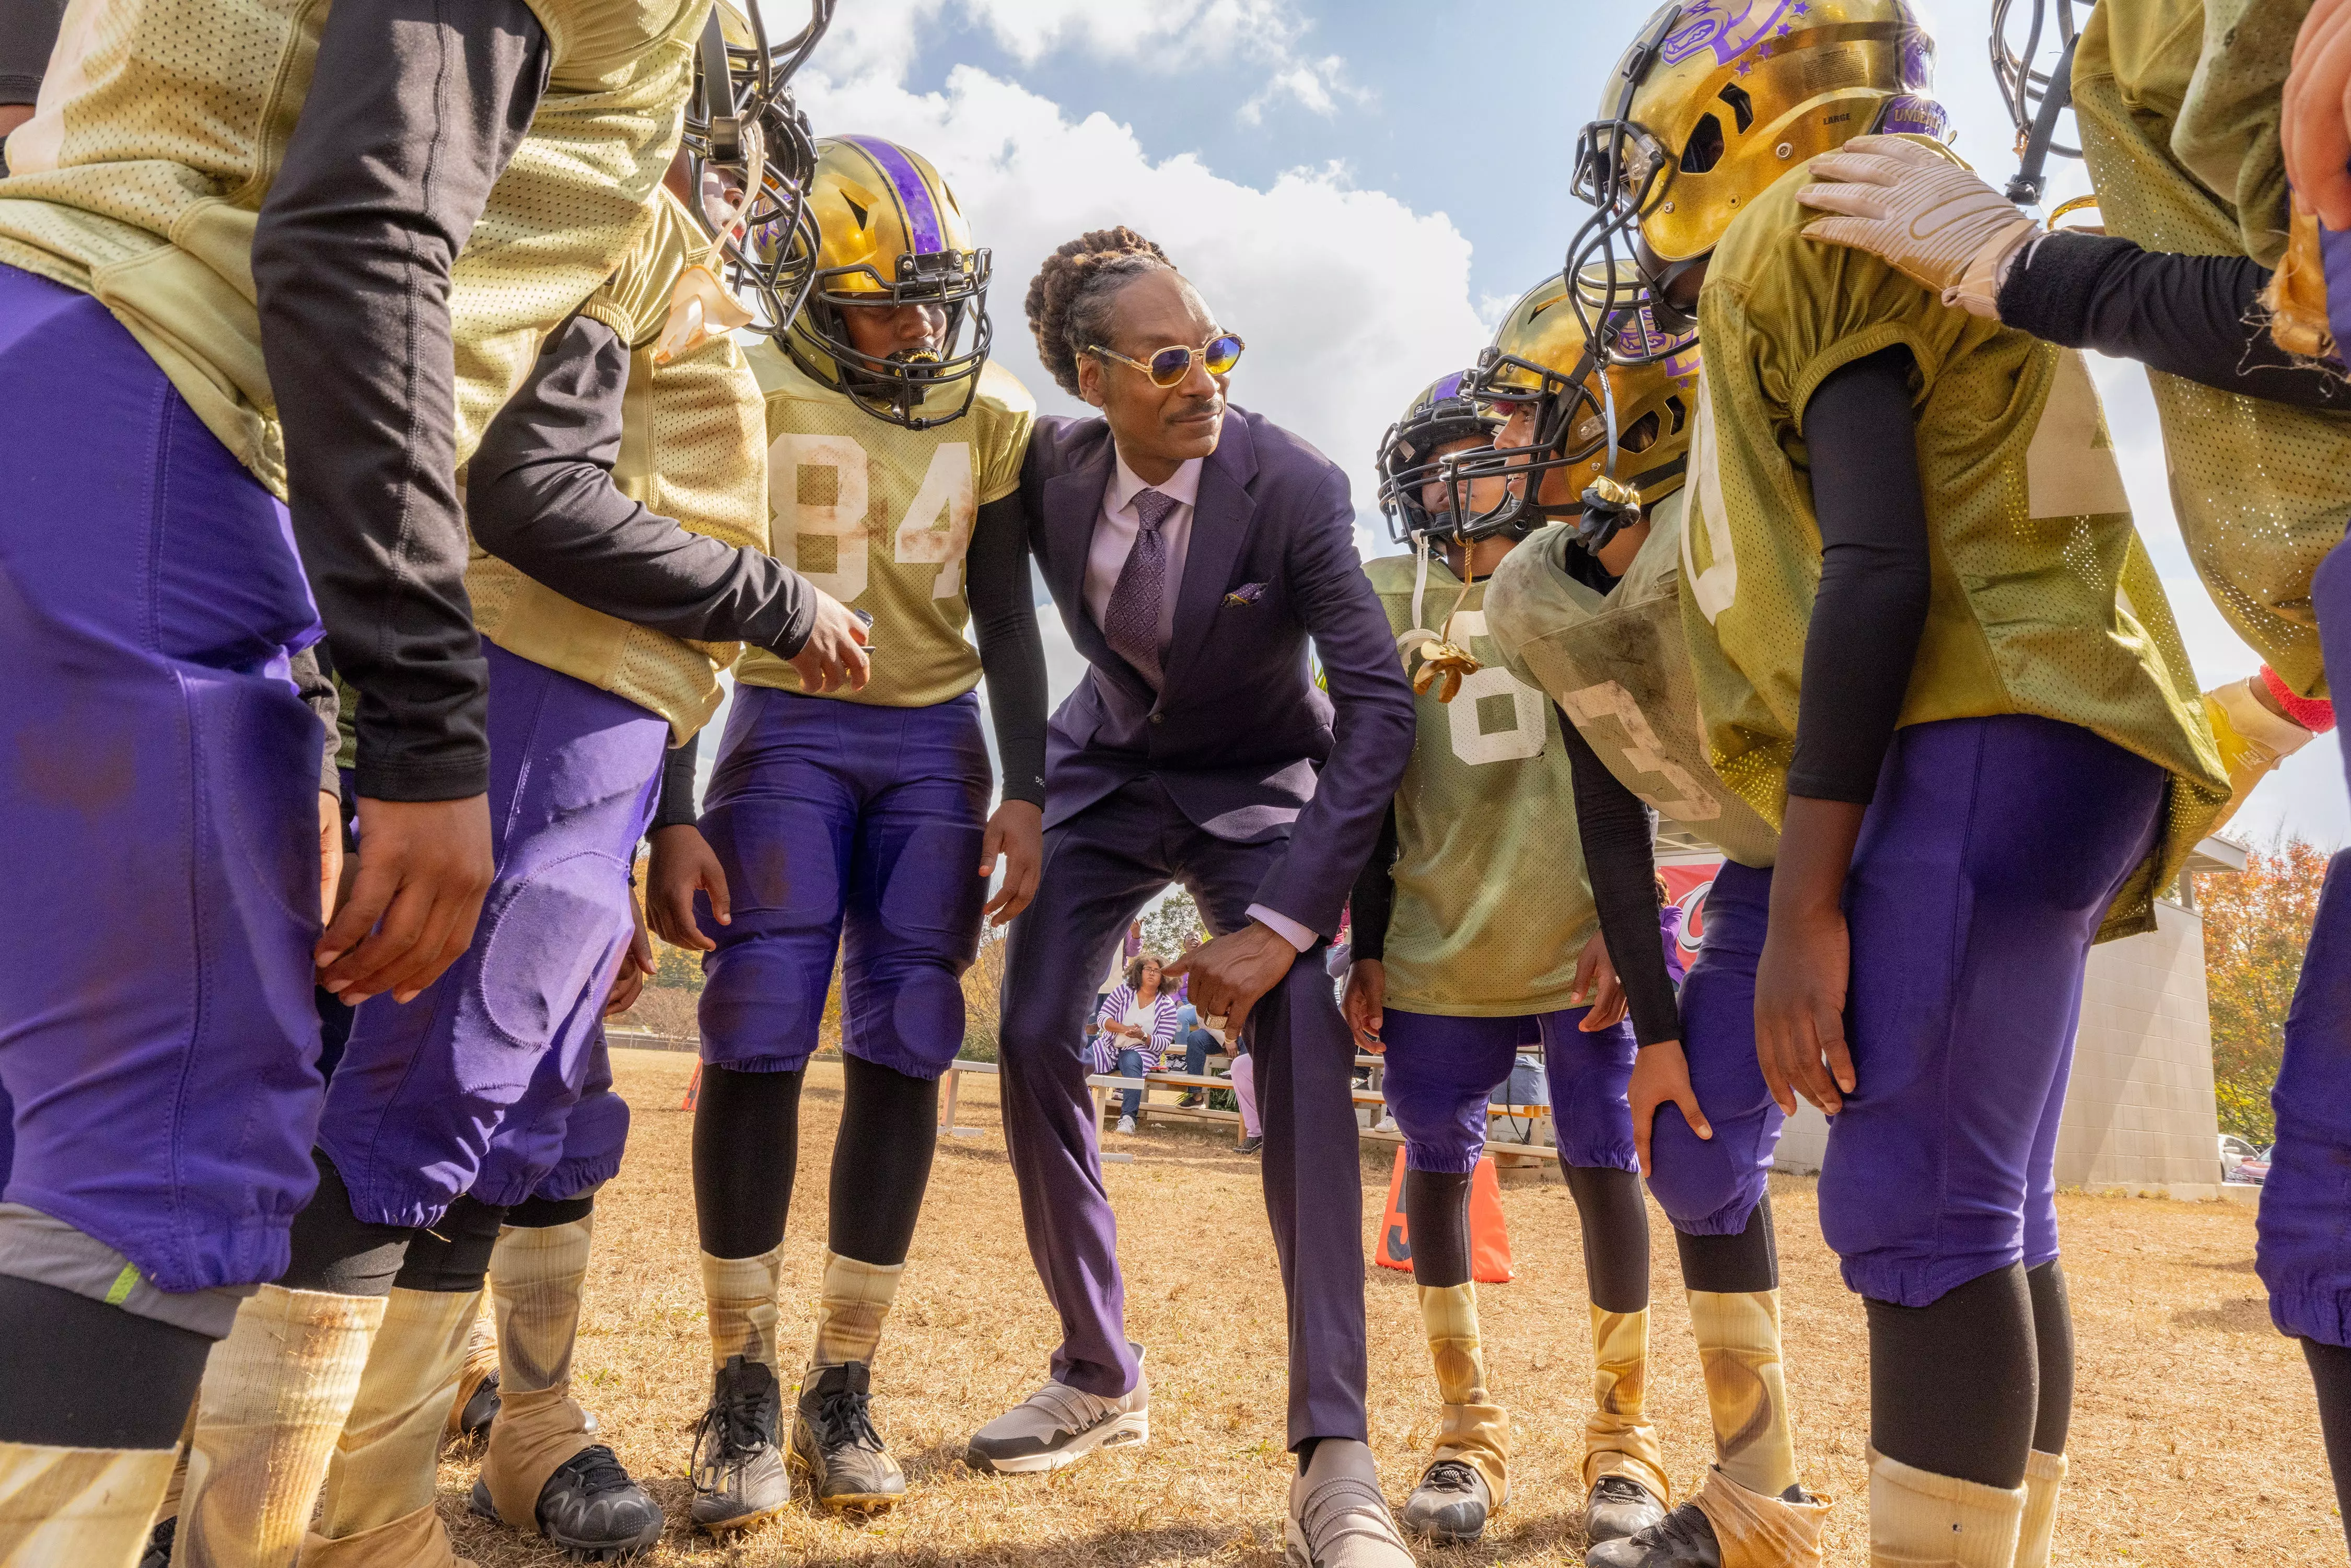 Snoop Dogg (center) stars as a self-centered former pro who reluctantly takes on coaching duties for a kids' team in 